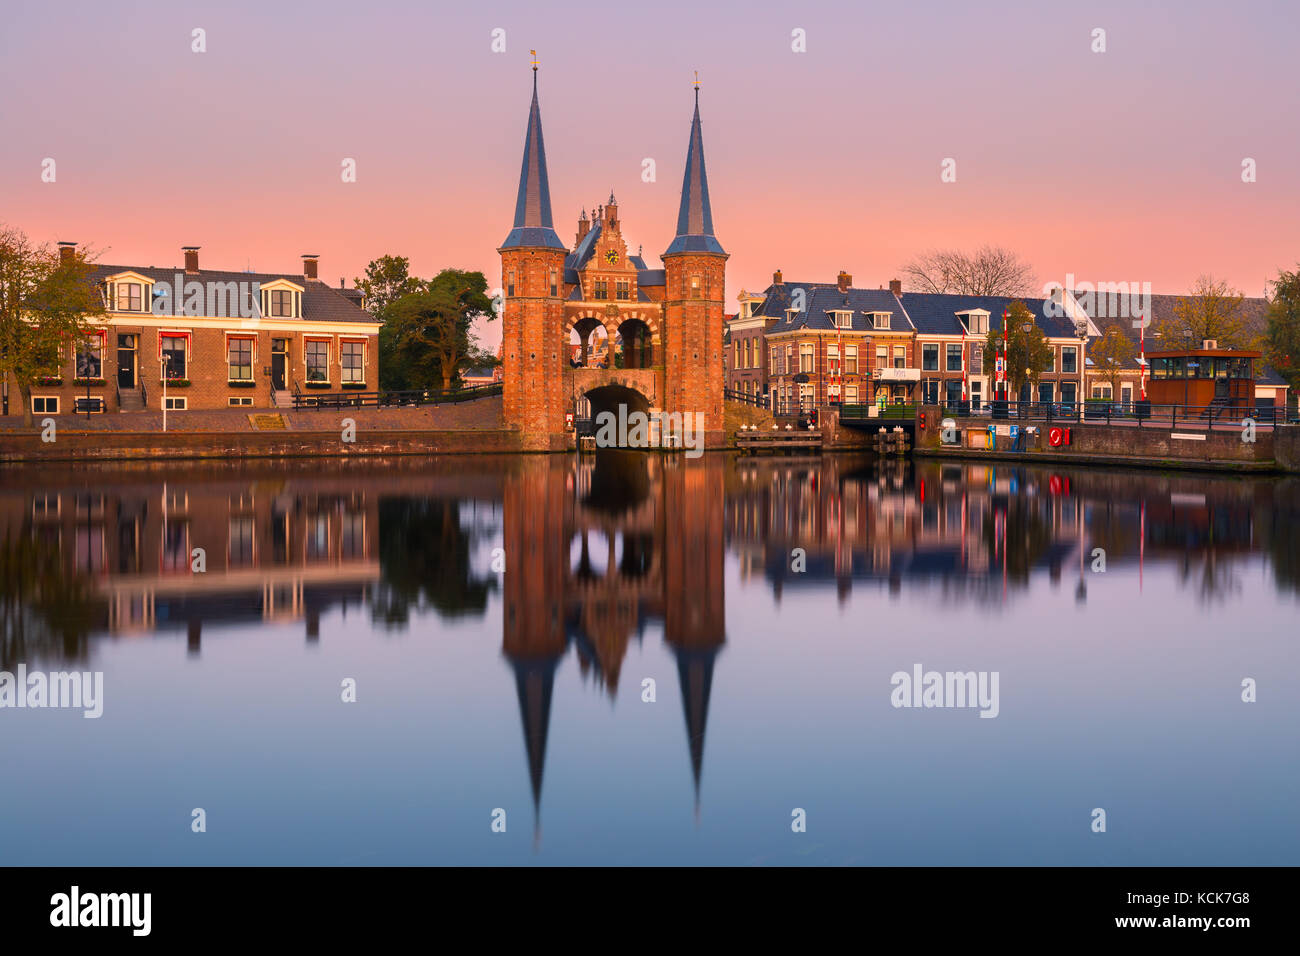 The Waterpoort or Hoogendster Pijp is a water gate, a gate in a defensive wall that connects a city to a waterway. It is situated in Sneek, the Nether Stock Photo